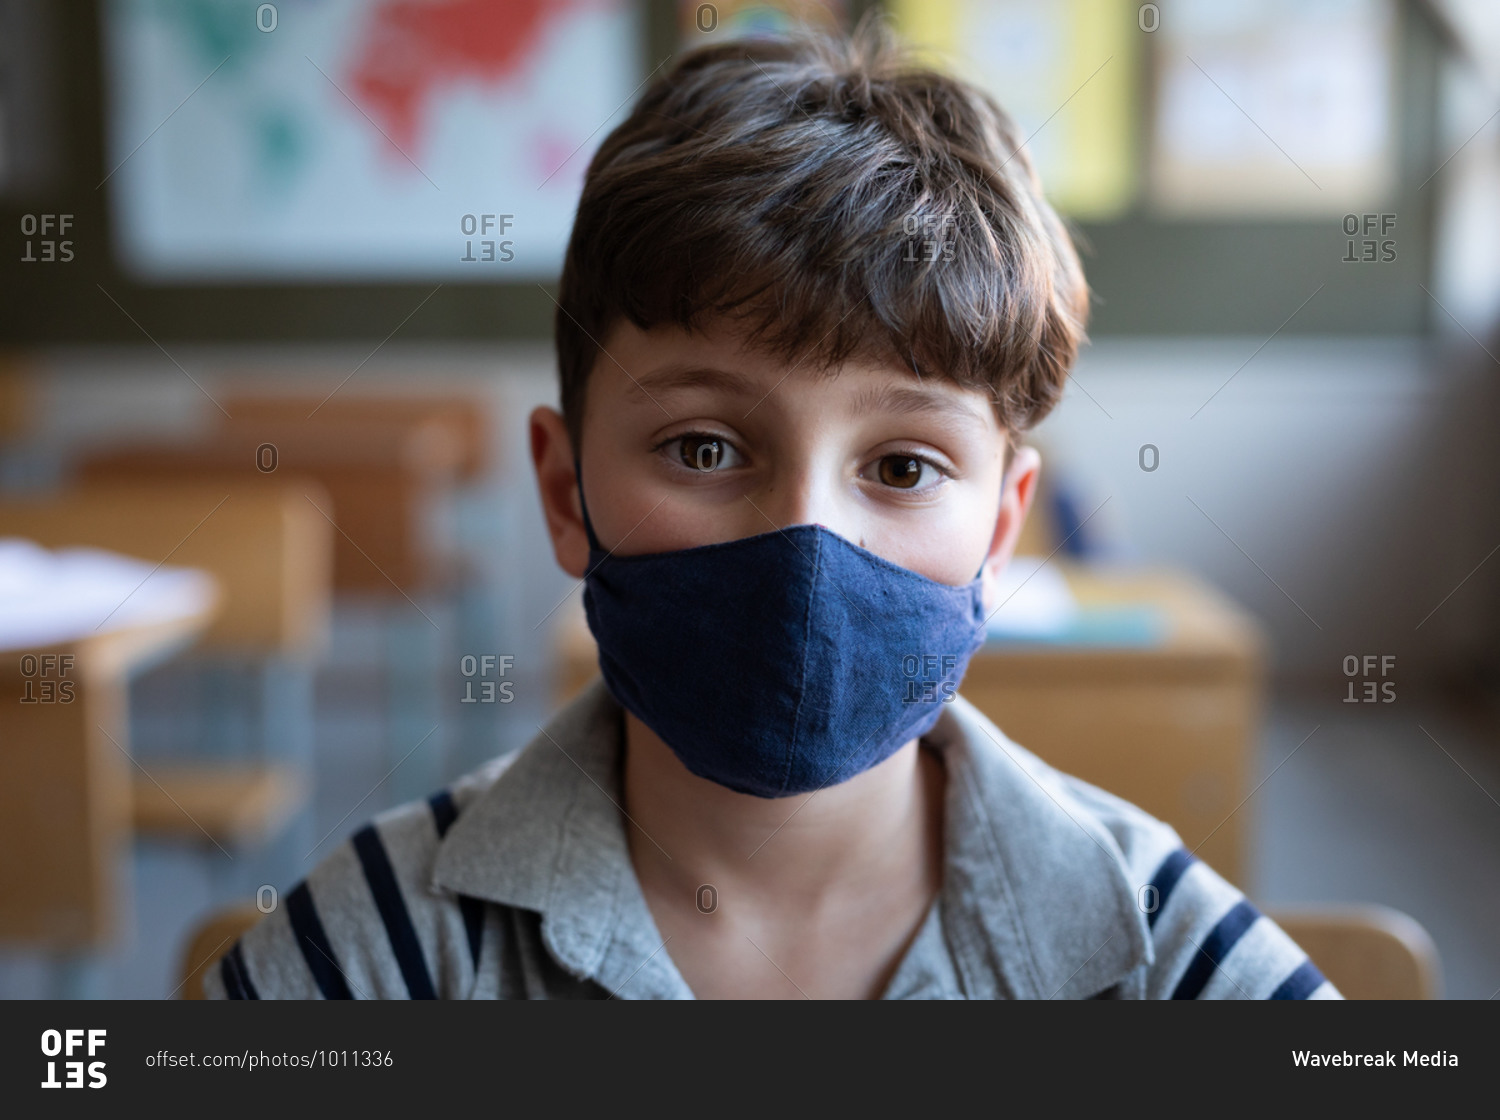 Portrait of a Caucasian boy wearing a face mask, sitting on his desk in class at school. Primary education social distancing health safety during Covid19 Coronavirus pandemic.